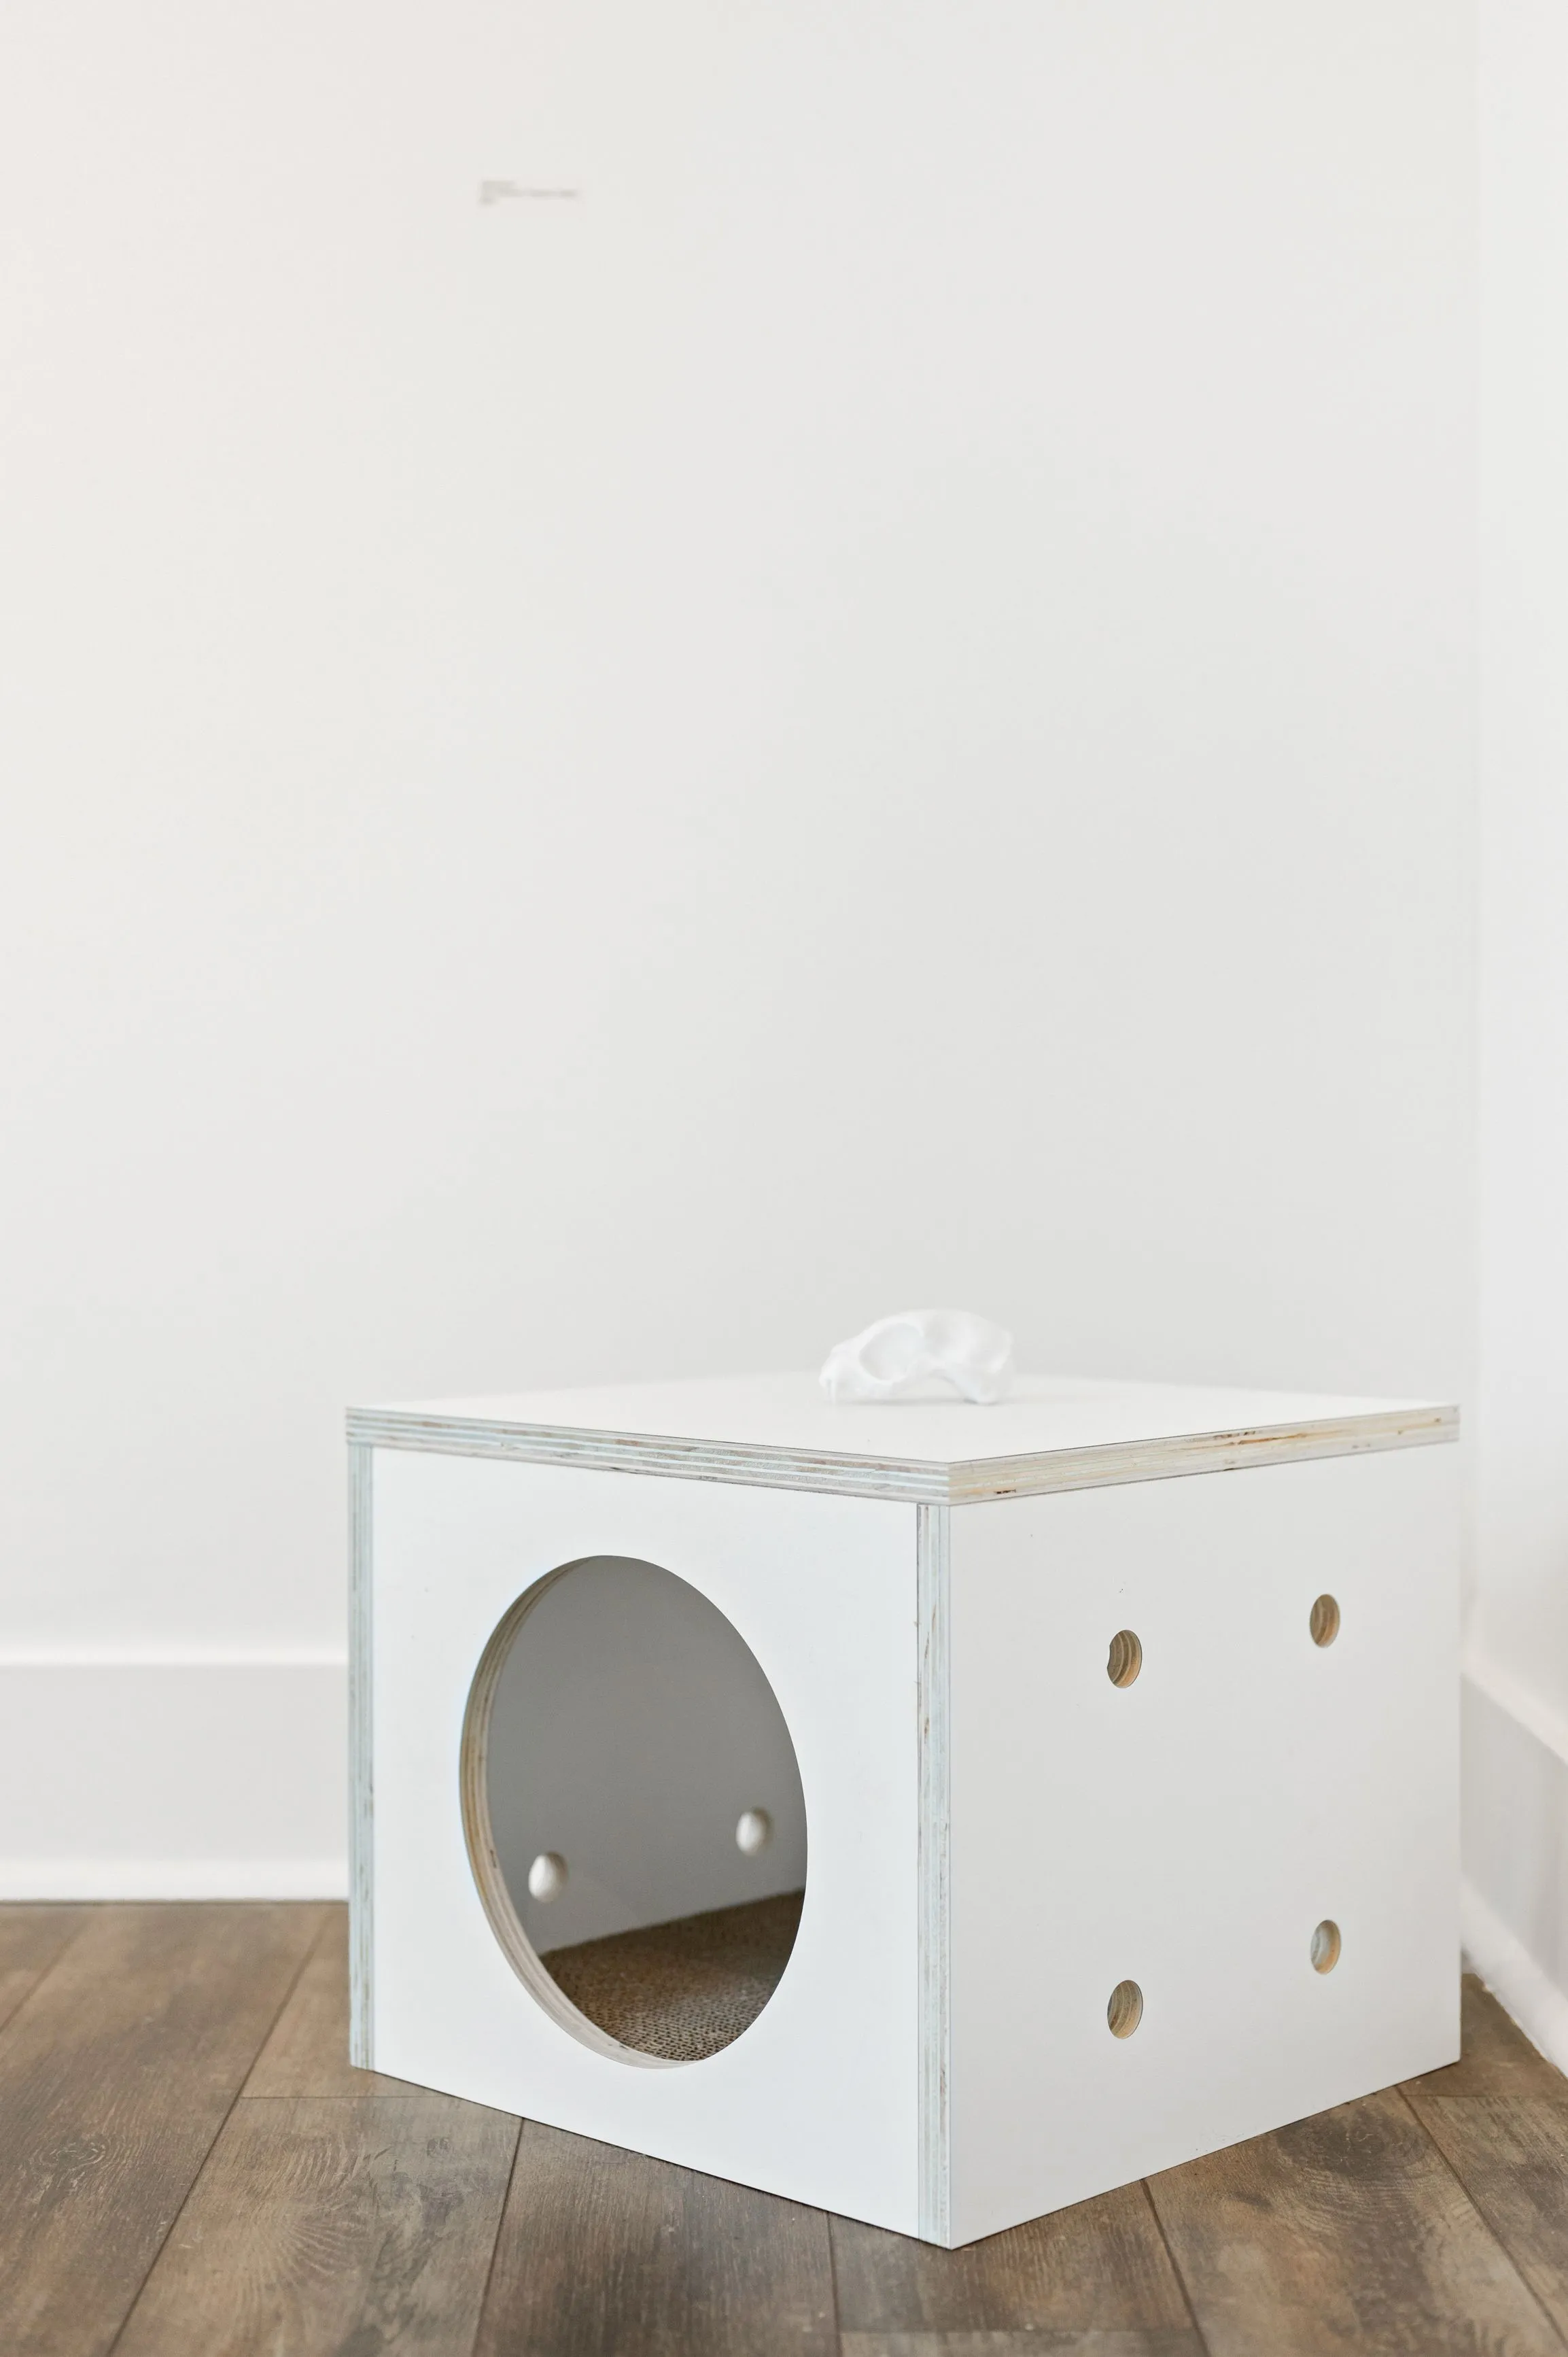 White modern cat house with a round entrance, against a white wall on a wooden floor.